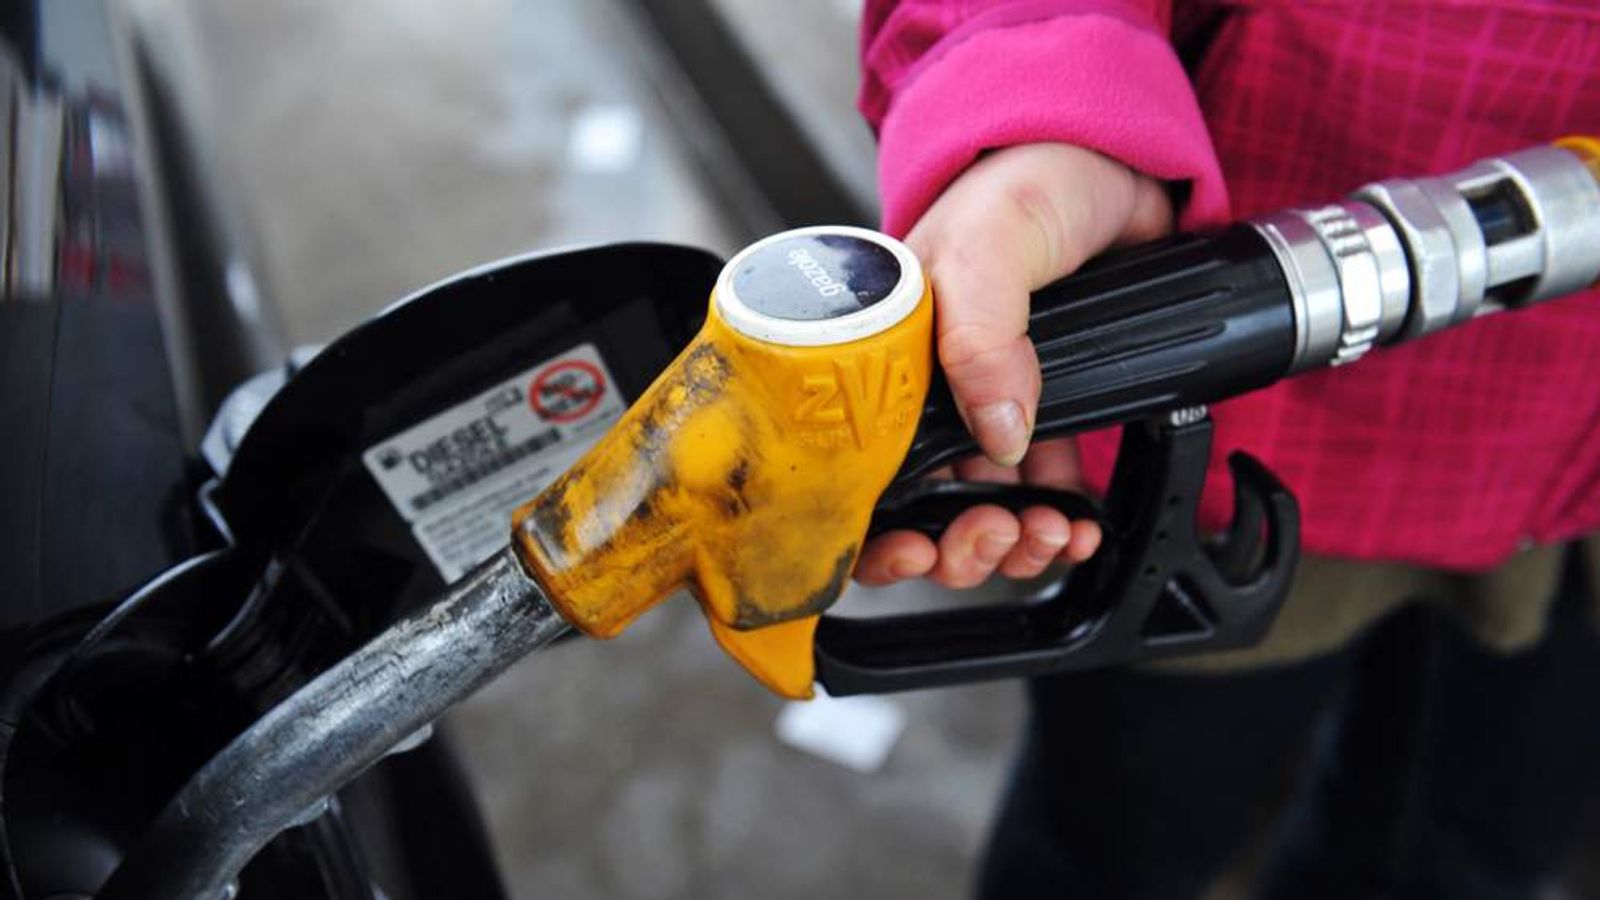 Diesel Drivers 'Taken For A Ride' At The Pump.